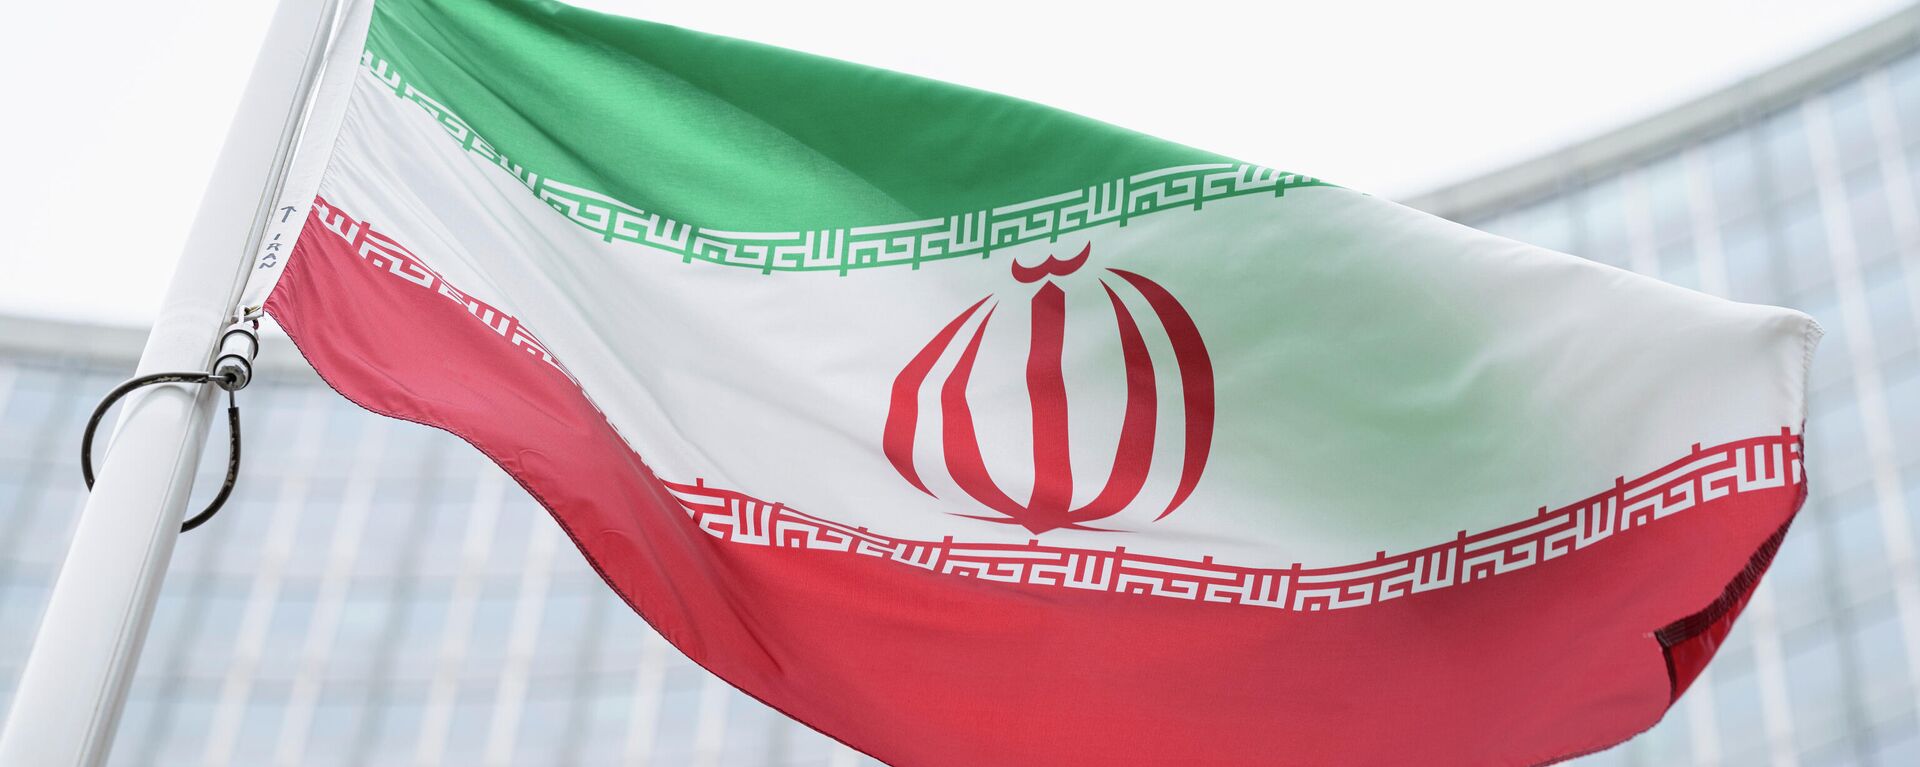 FILE - The flag of Iran waves in front of the the International Center building with the headquarters of the International Atomic Energy Agency, IAEA, in Vienna, AustriaI, May 24, 2021. On Monday, Nov. 29, 2021, negotiators are gathering in Vienna to resume efforts to revive Iran's 2015 nuclear deal with world powers, with hopes of quick progress muted after the arrival of a hard-line new government in Tehran led to a more than five-month hiatus. (AP Photo/Florian Schroetter, FILE) - Sputnik International, 1920, 03.04.2022